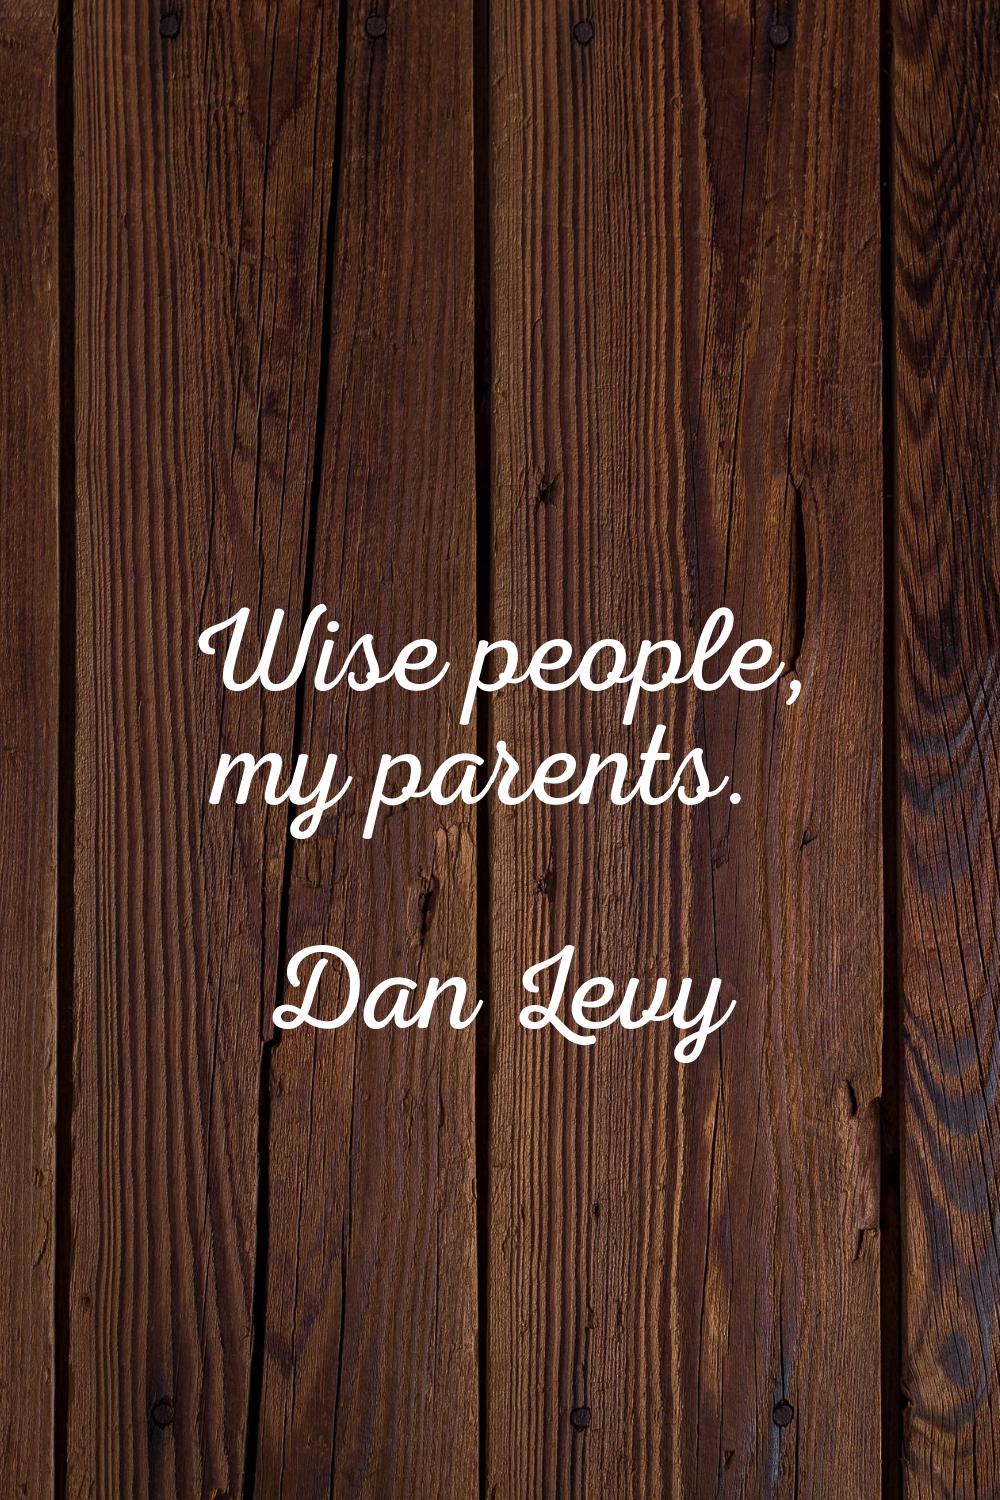 Wise people, my parents.